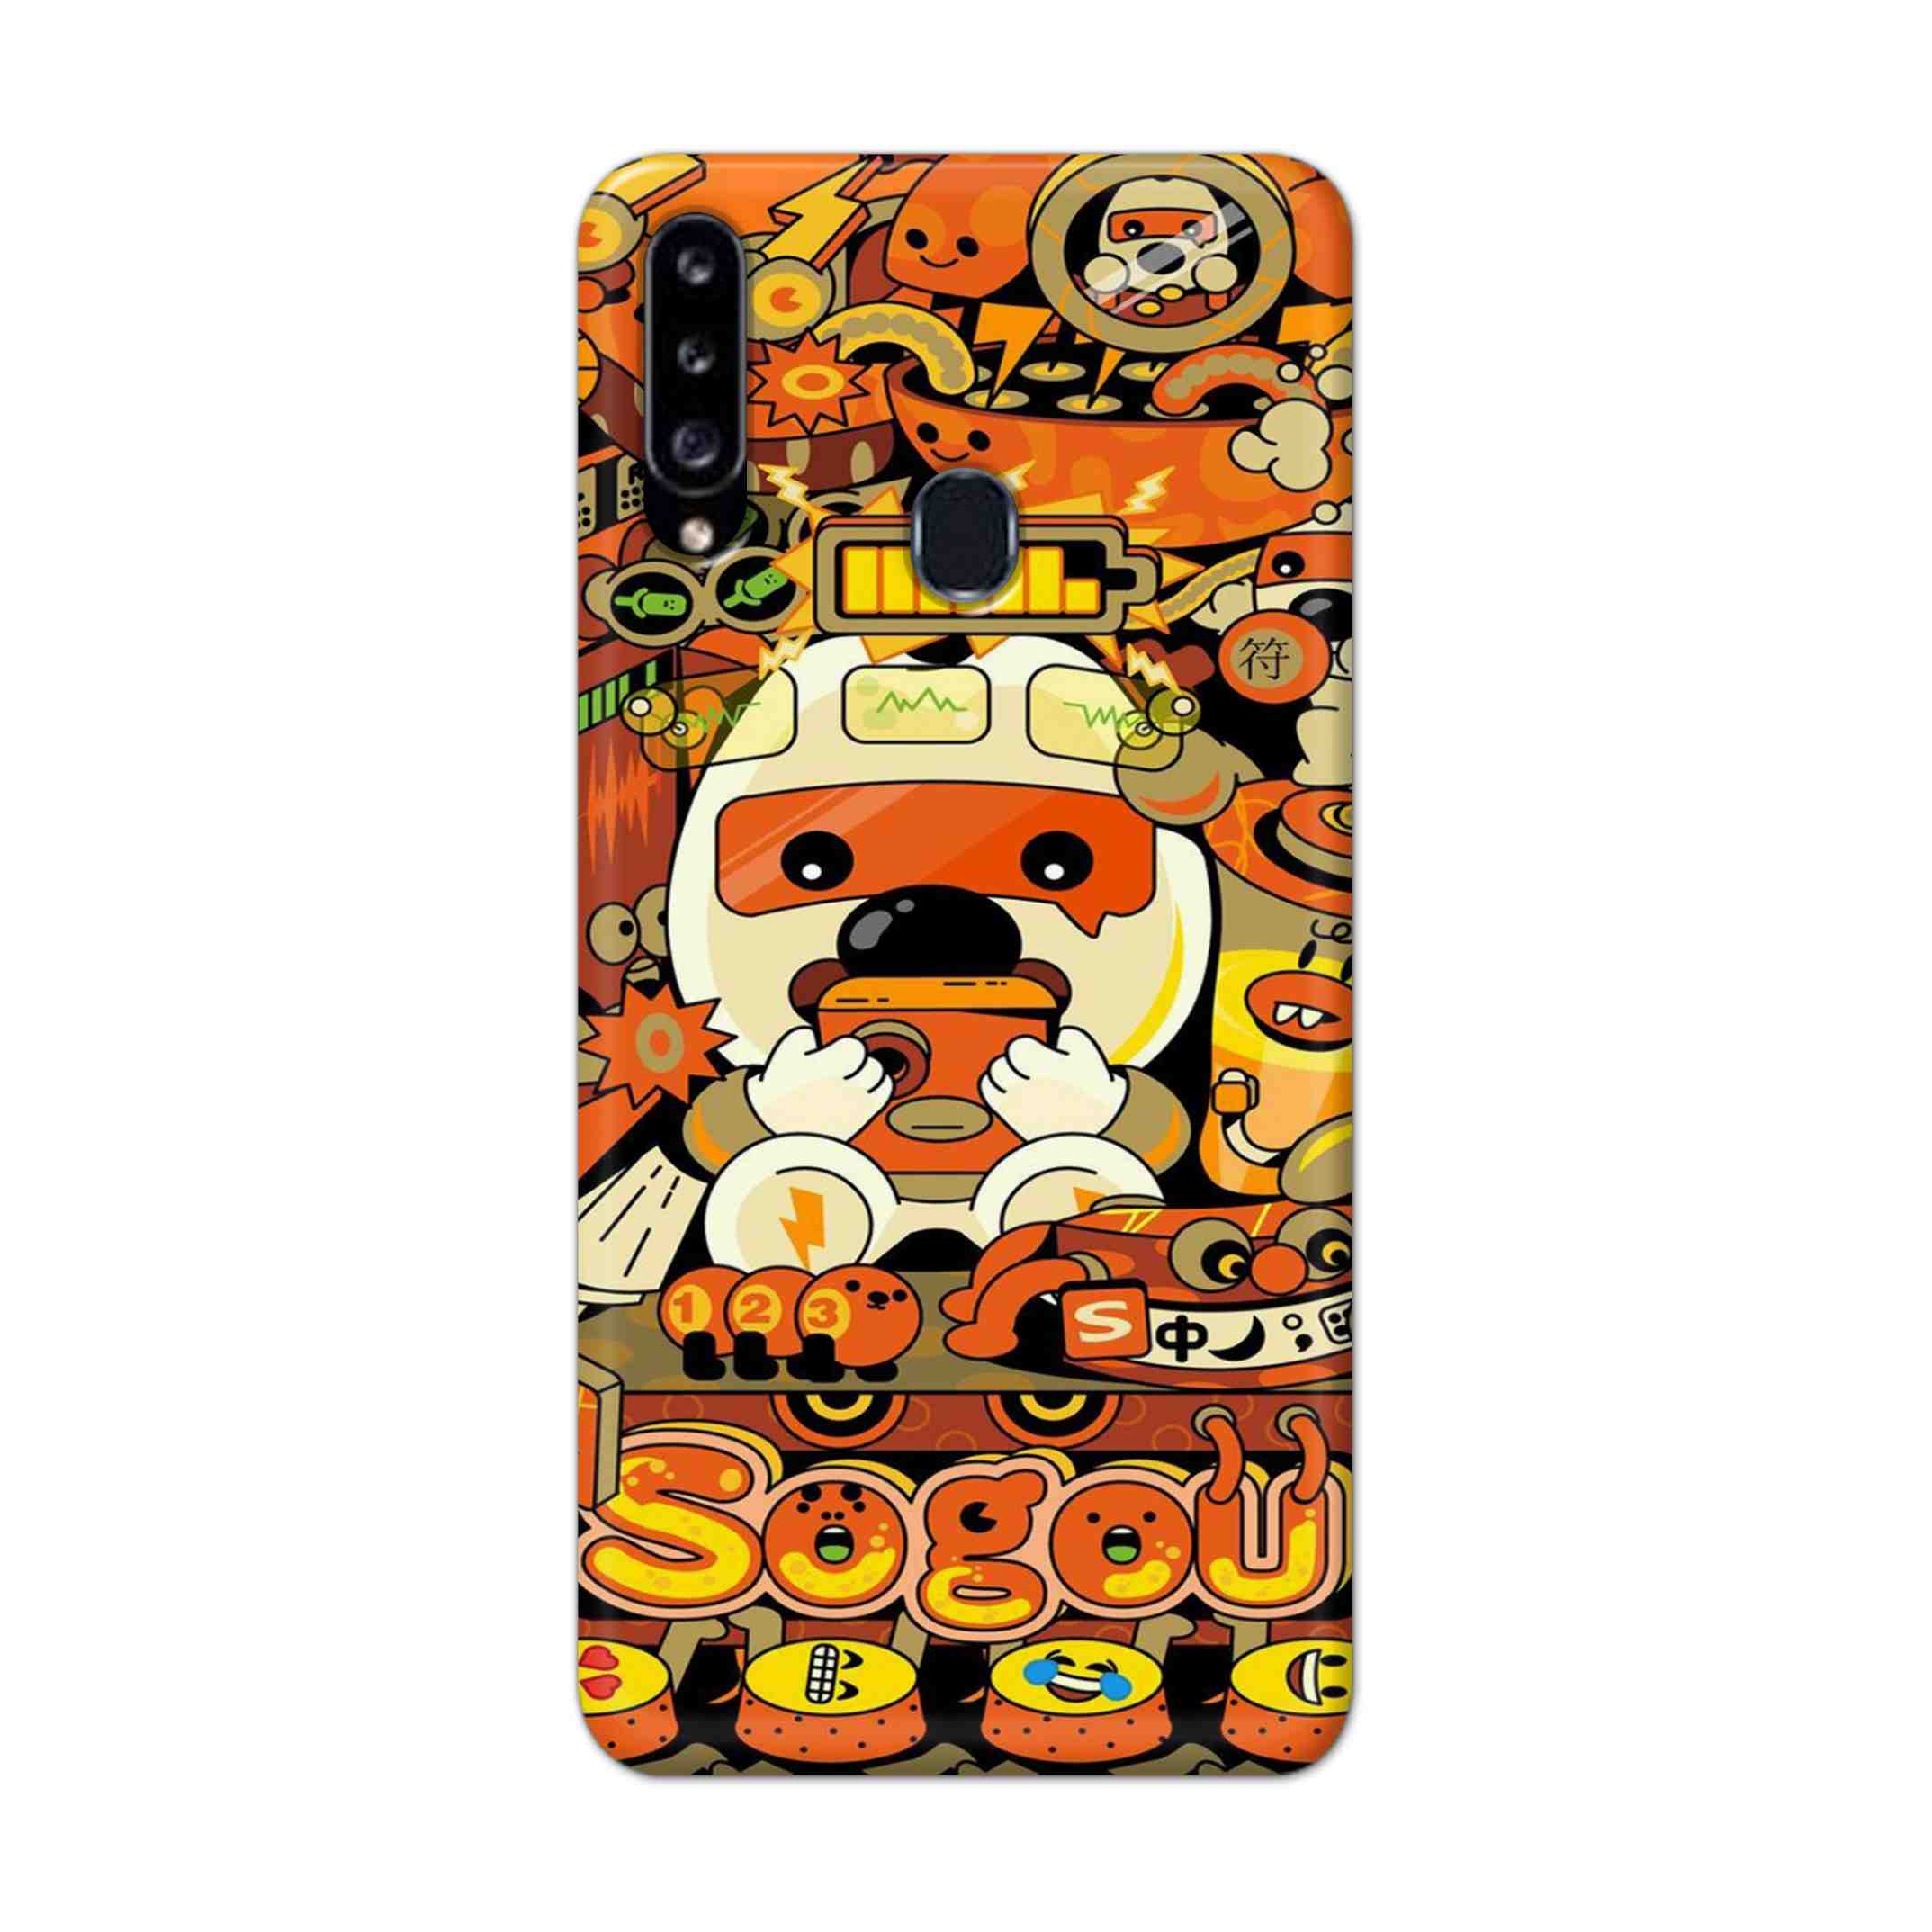 Buy Sogou Hard Back Mobile Phone Case Cover For Samsung Galaxy A21 Online